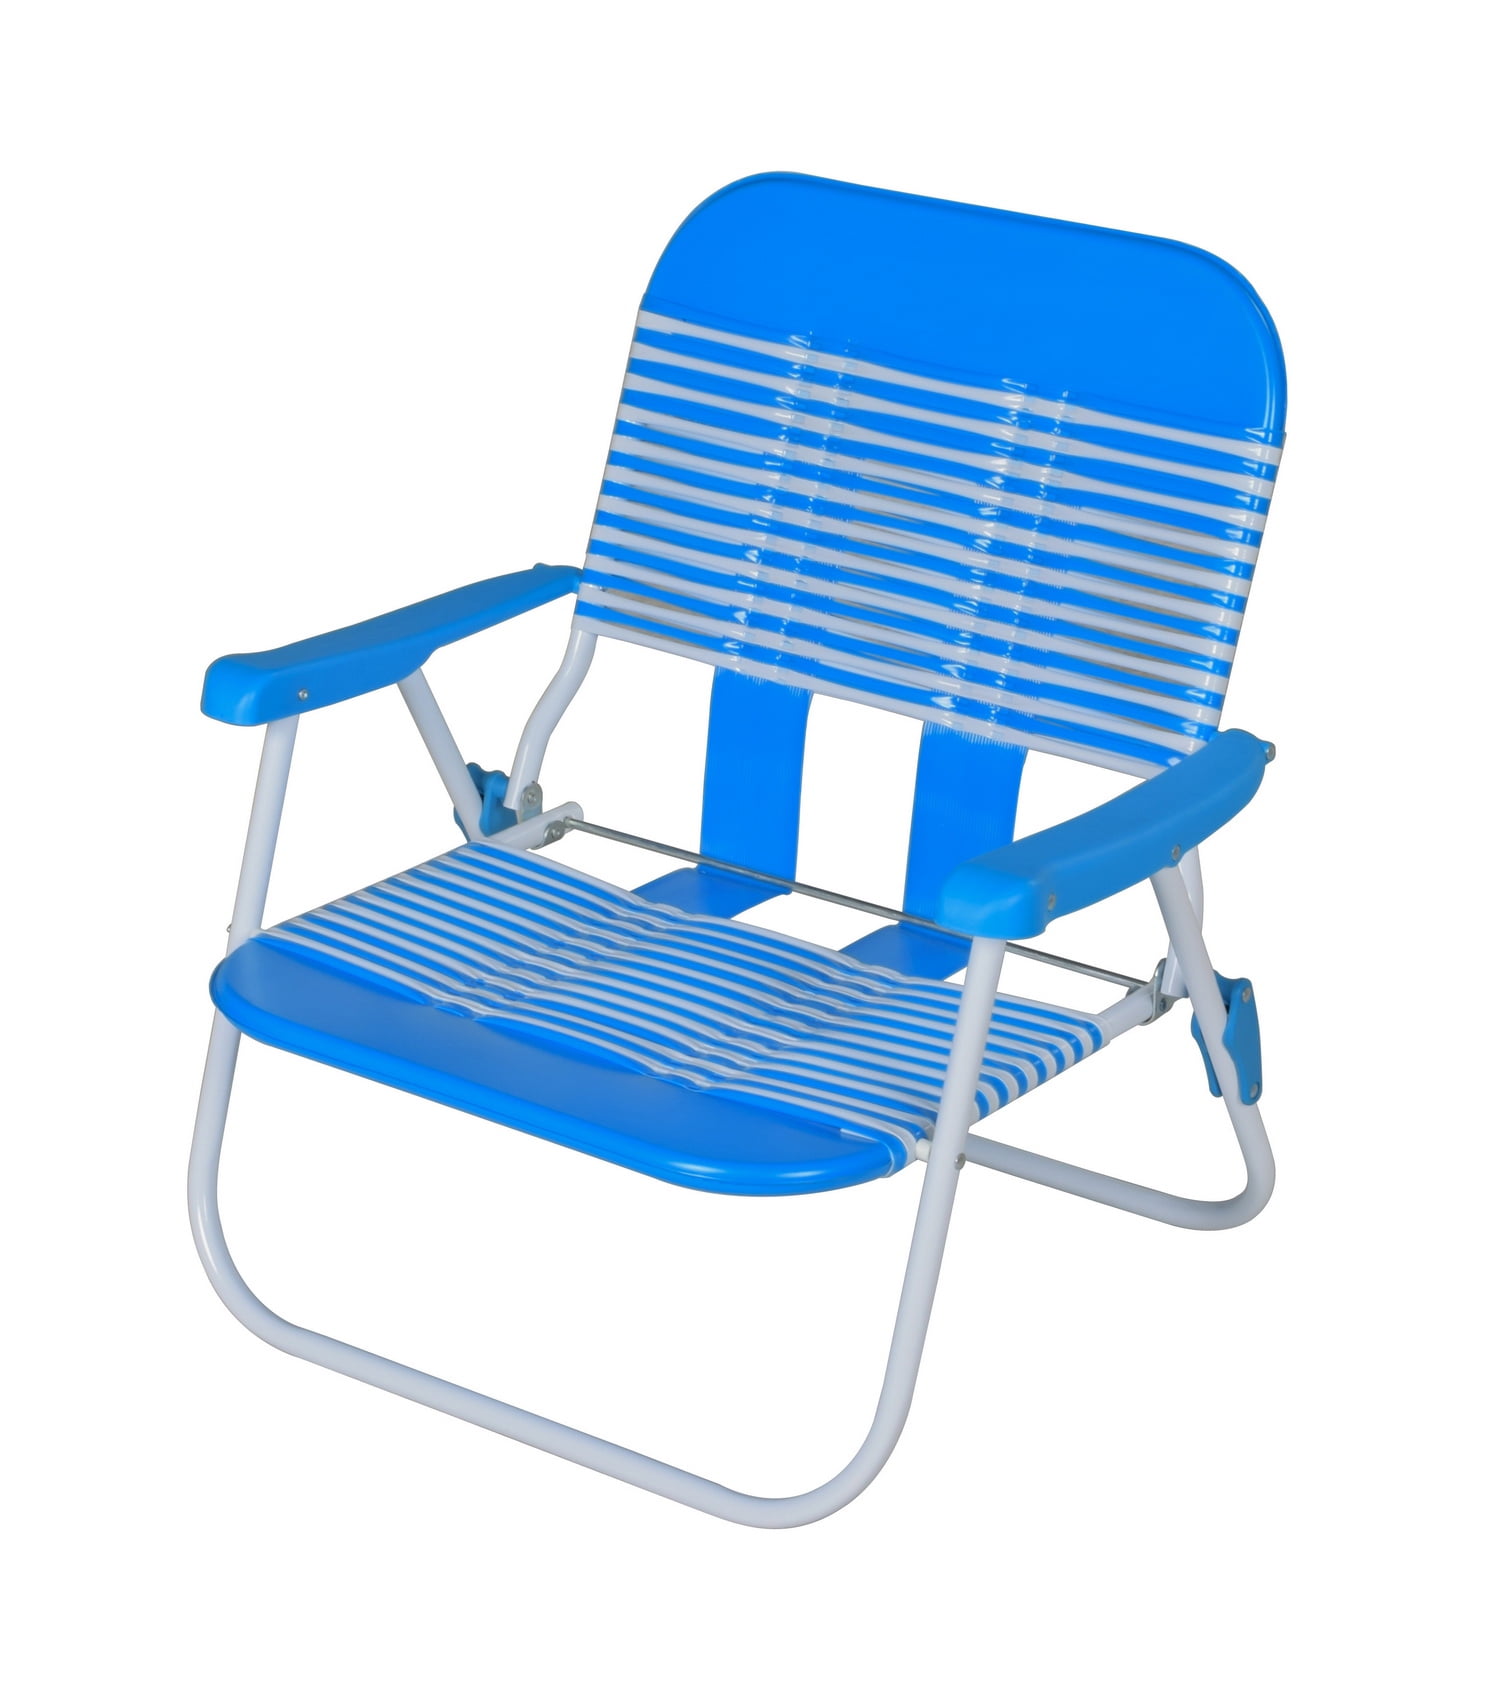 Creatice Folding Beach Jelly Lounge Chair for Living room